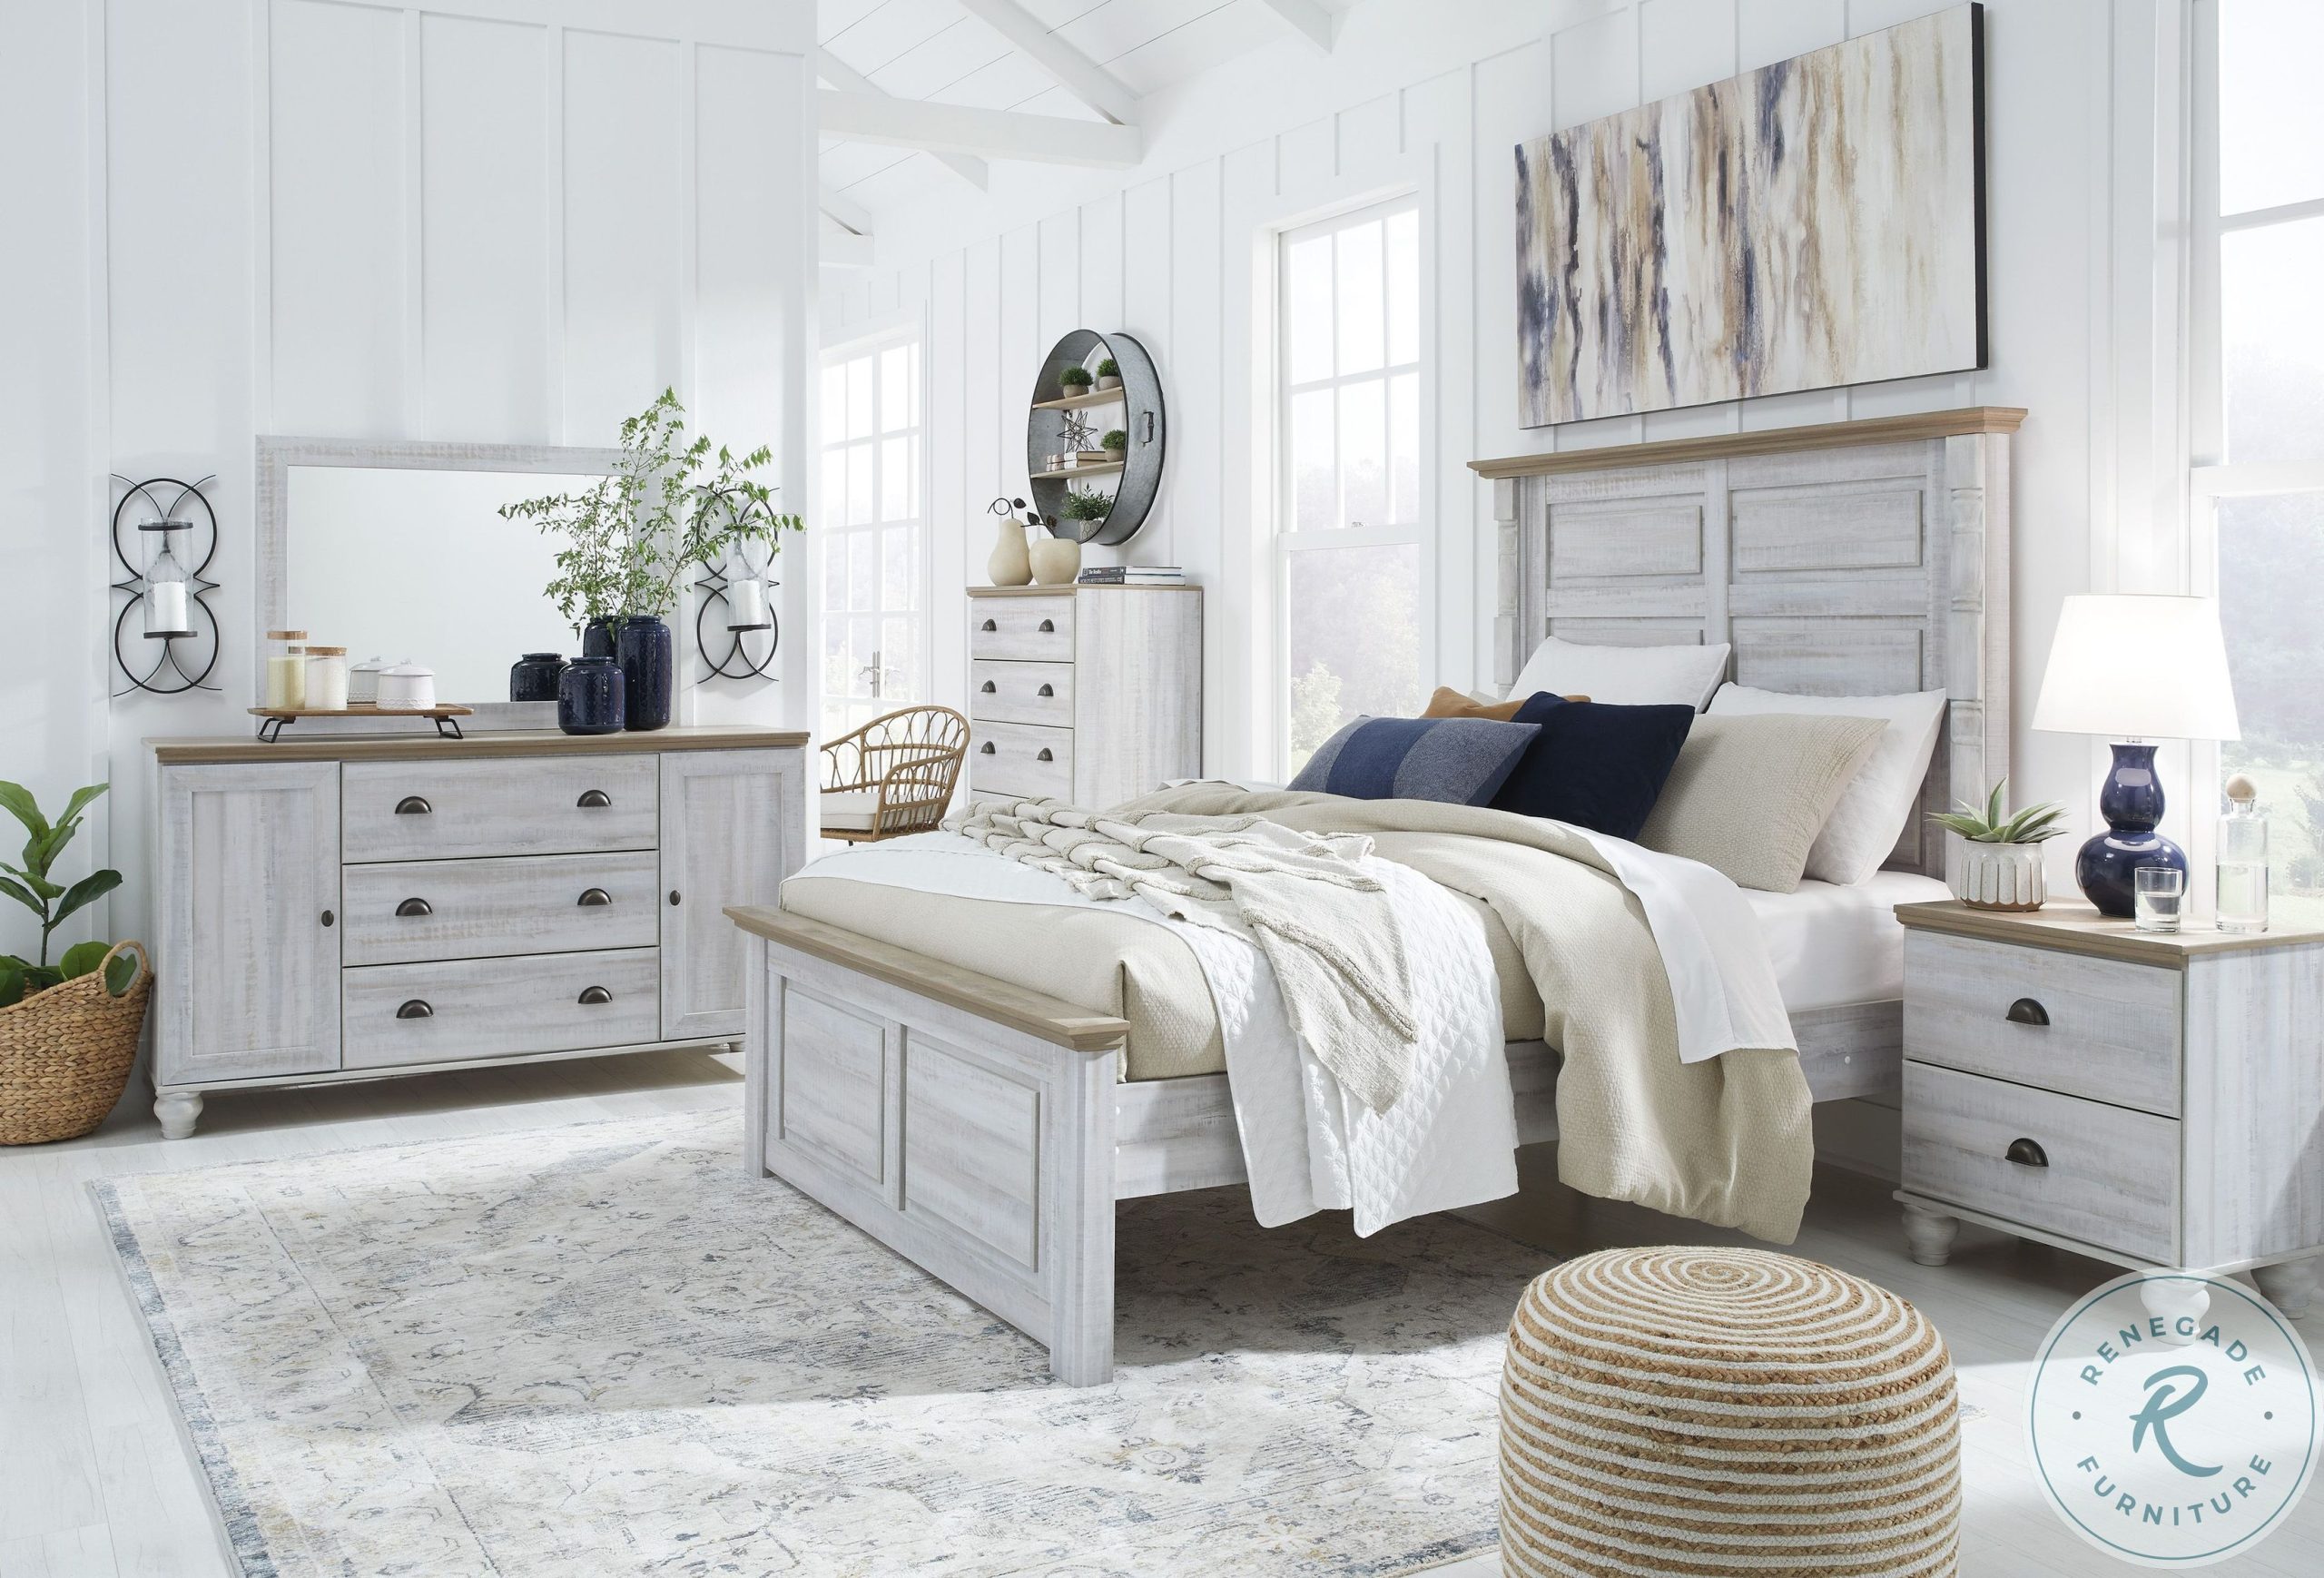 Tips for Choosing the Perfect Dresser for Your Bedroom